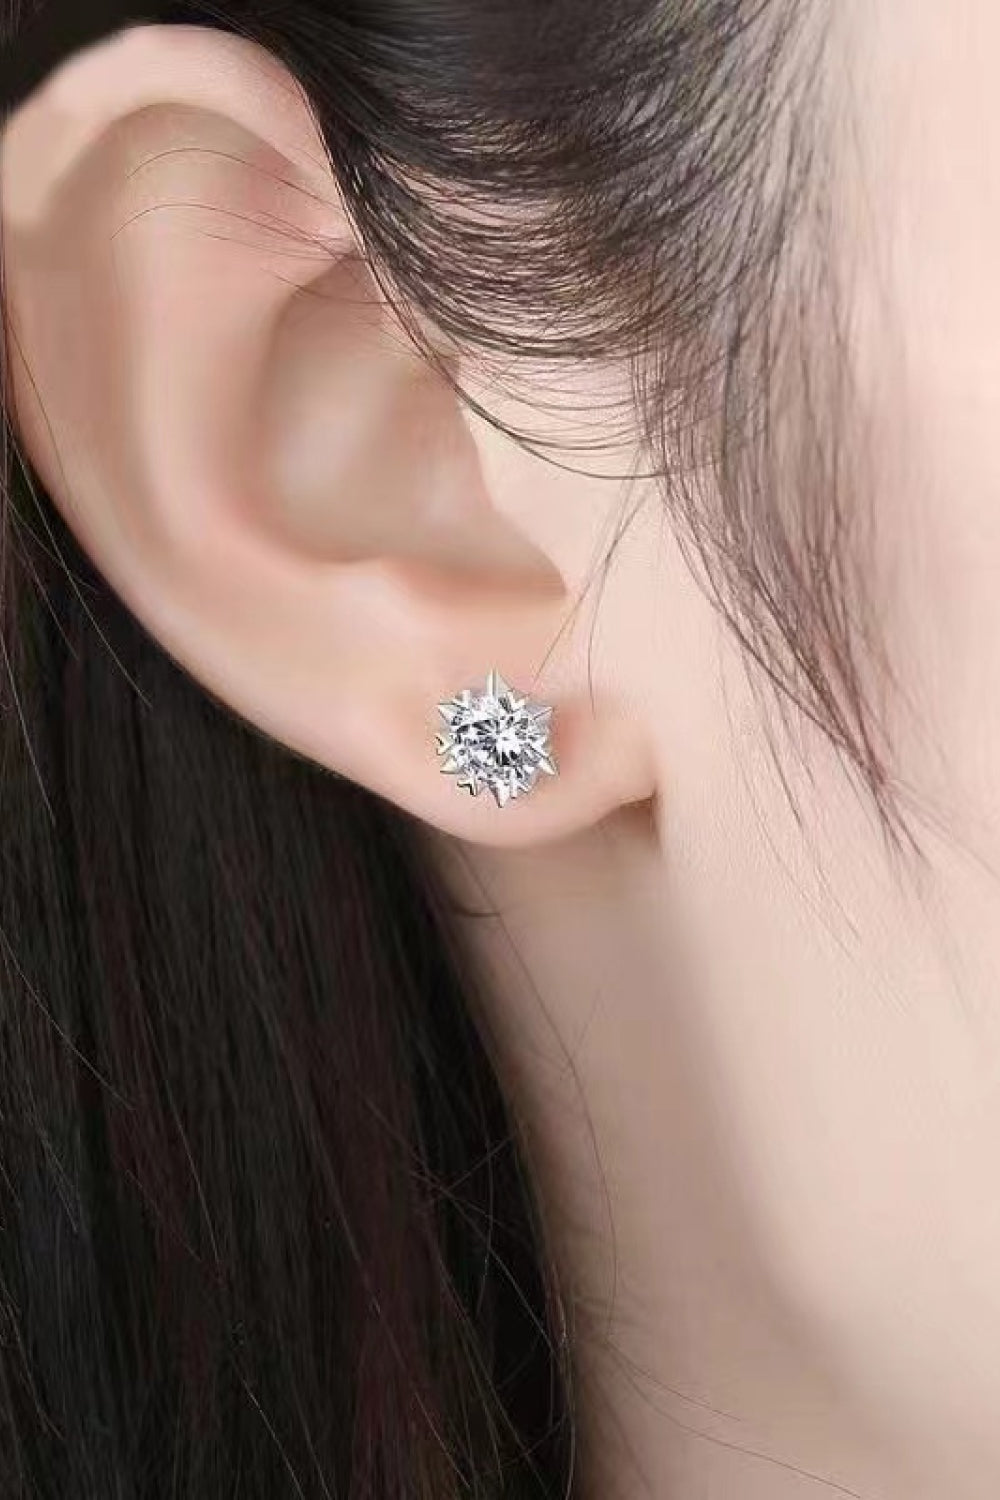 Stuck On You 4 Carat Moissanite Stud Earrings (Platinum-Plated Fine Silver)